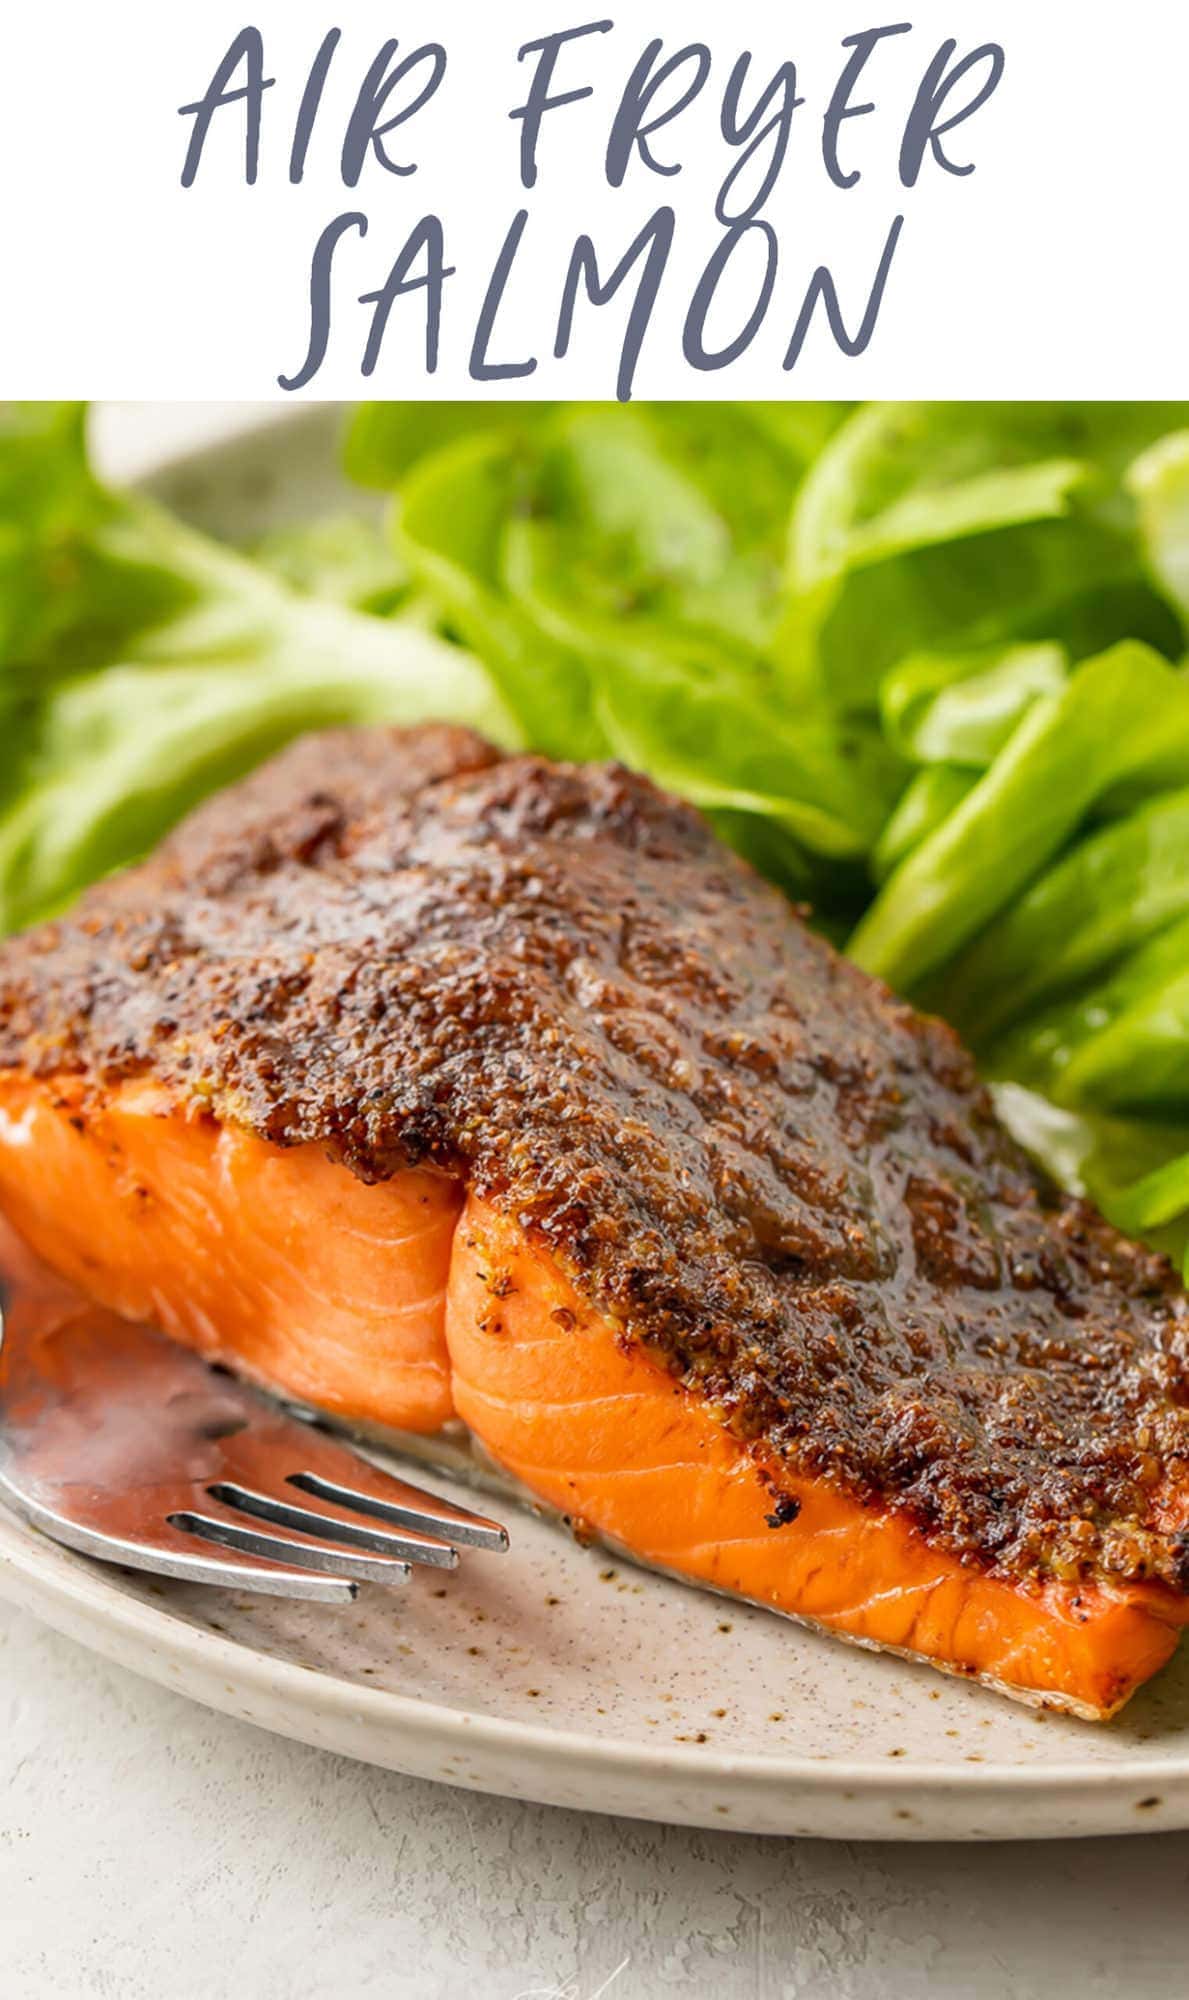 Air Fryer Salmon with Brown Sugar Crust - 40 Aprons